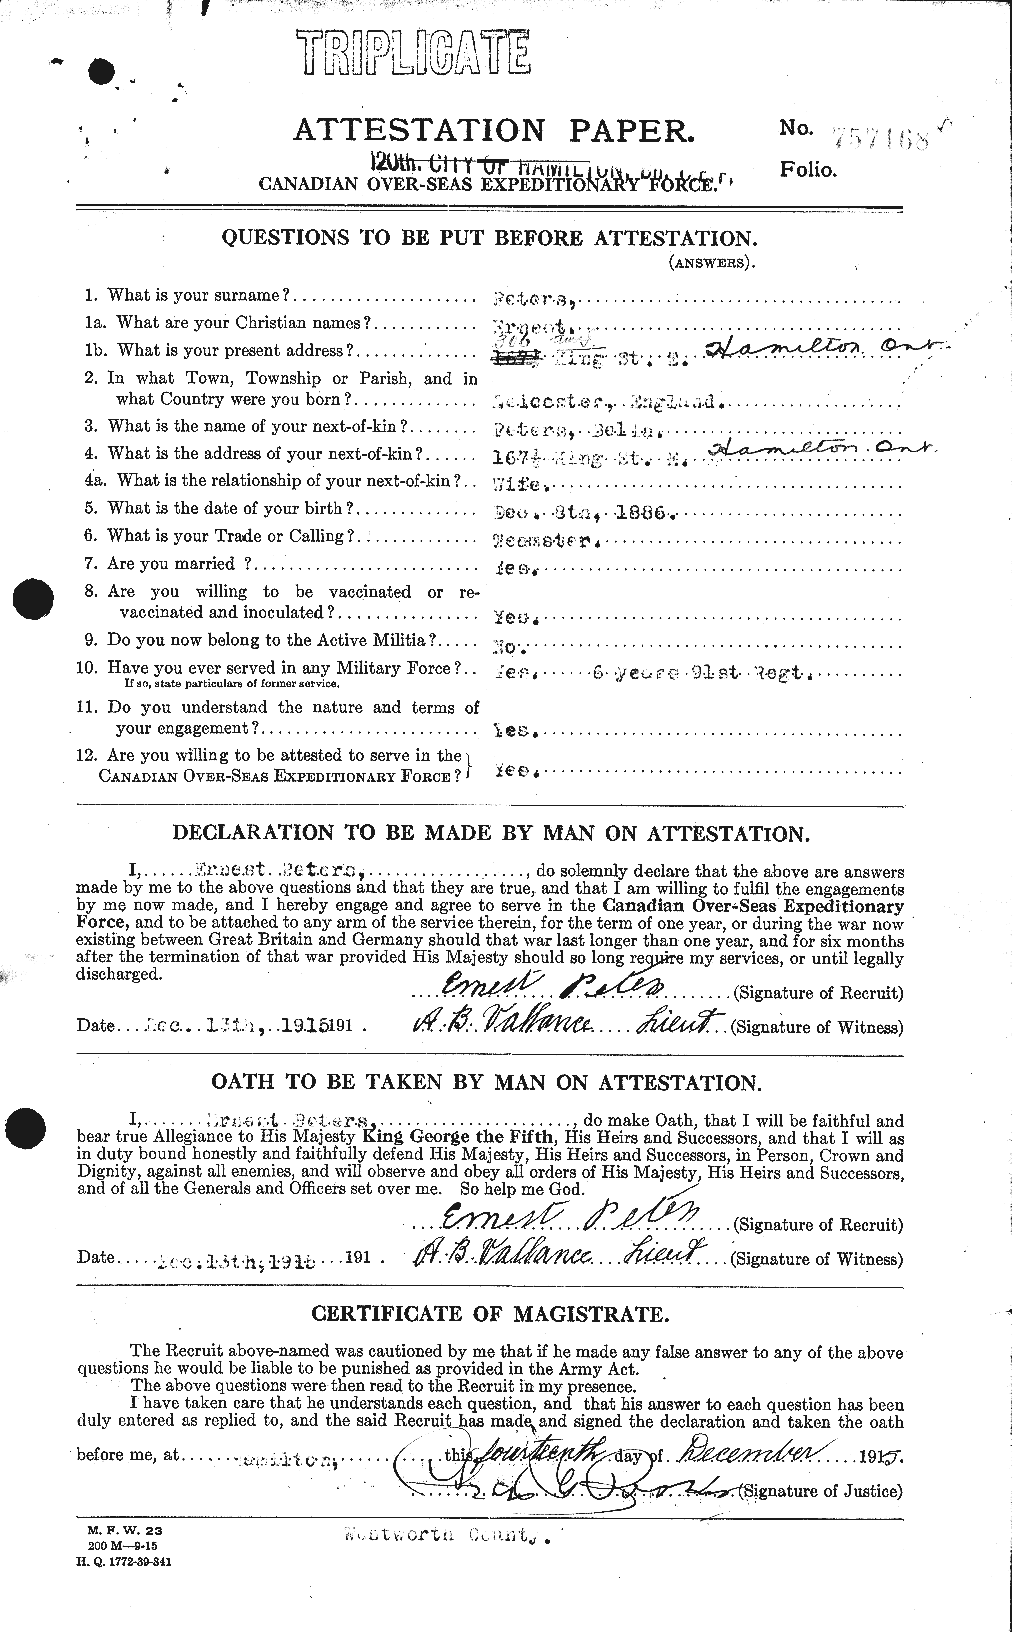 Personnel Records of the First World War - CEF 575413a